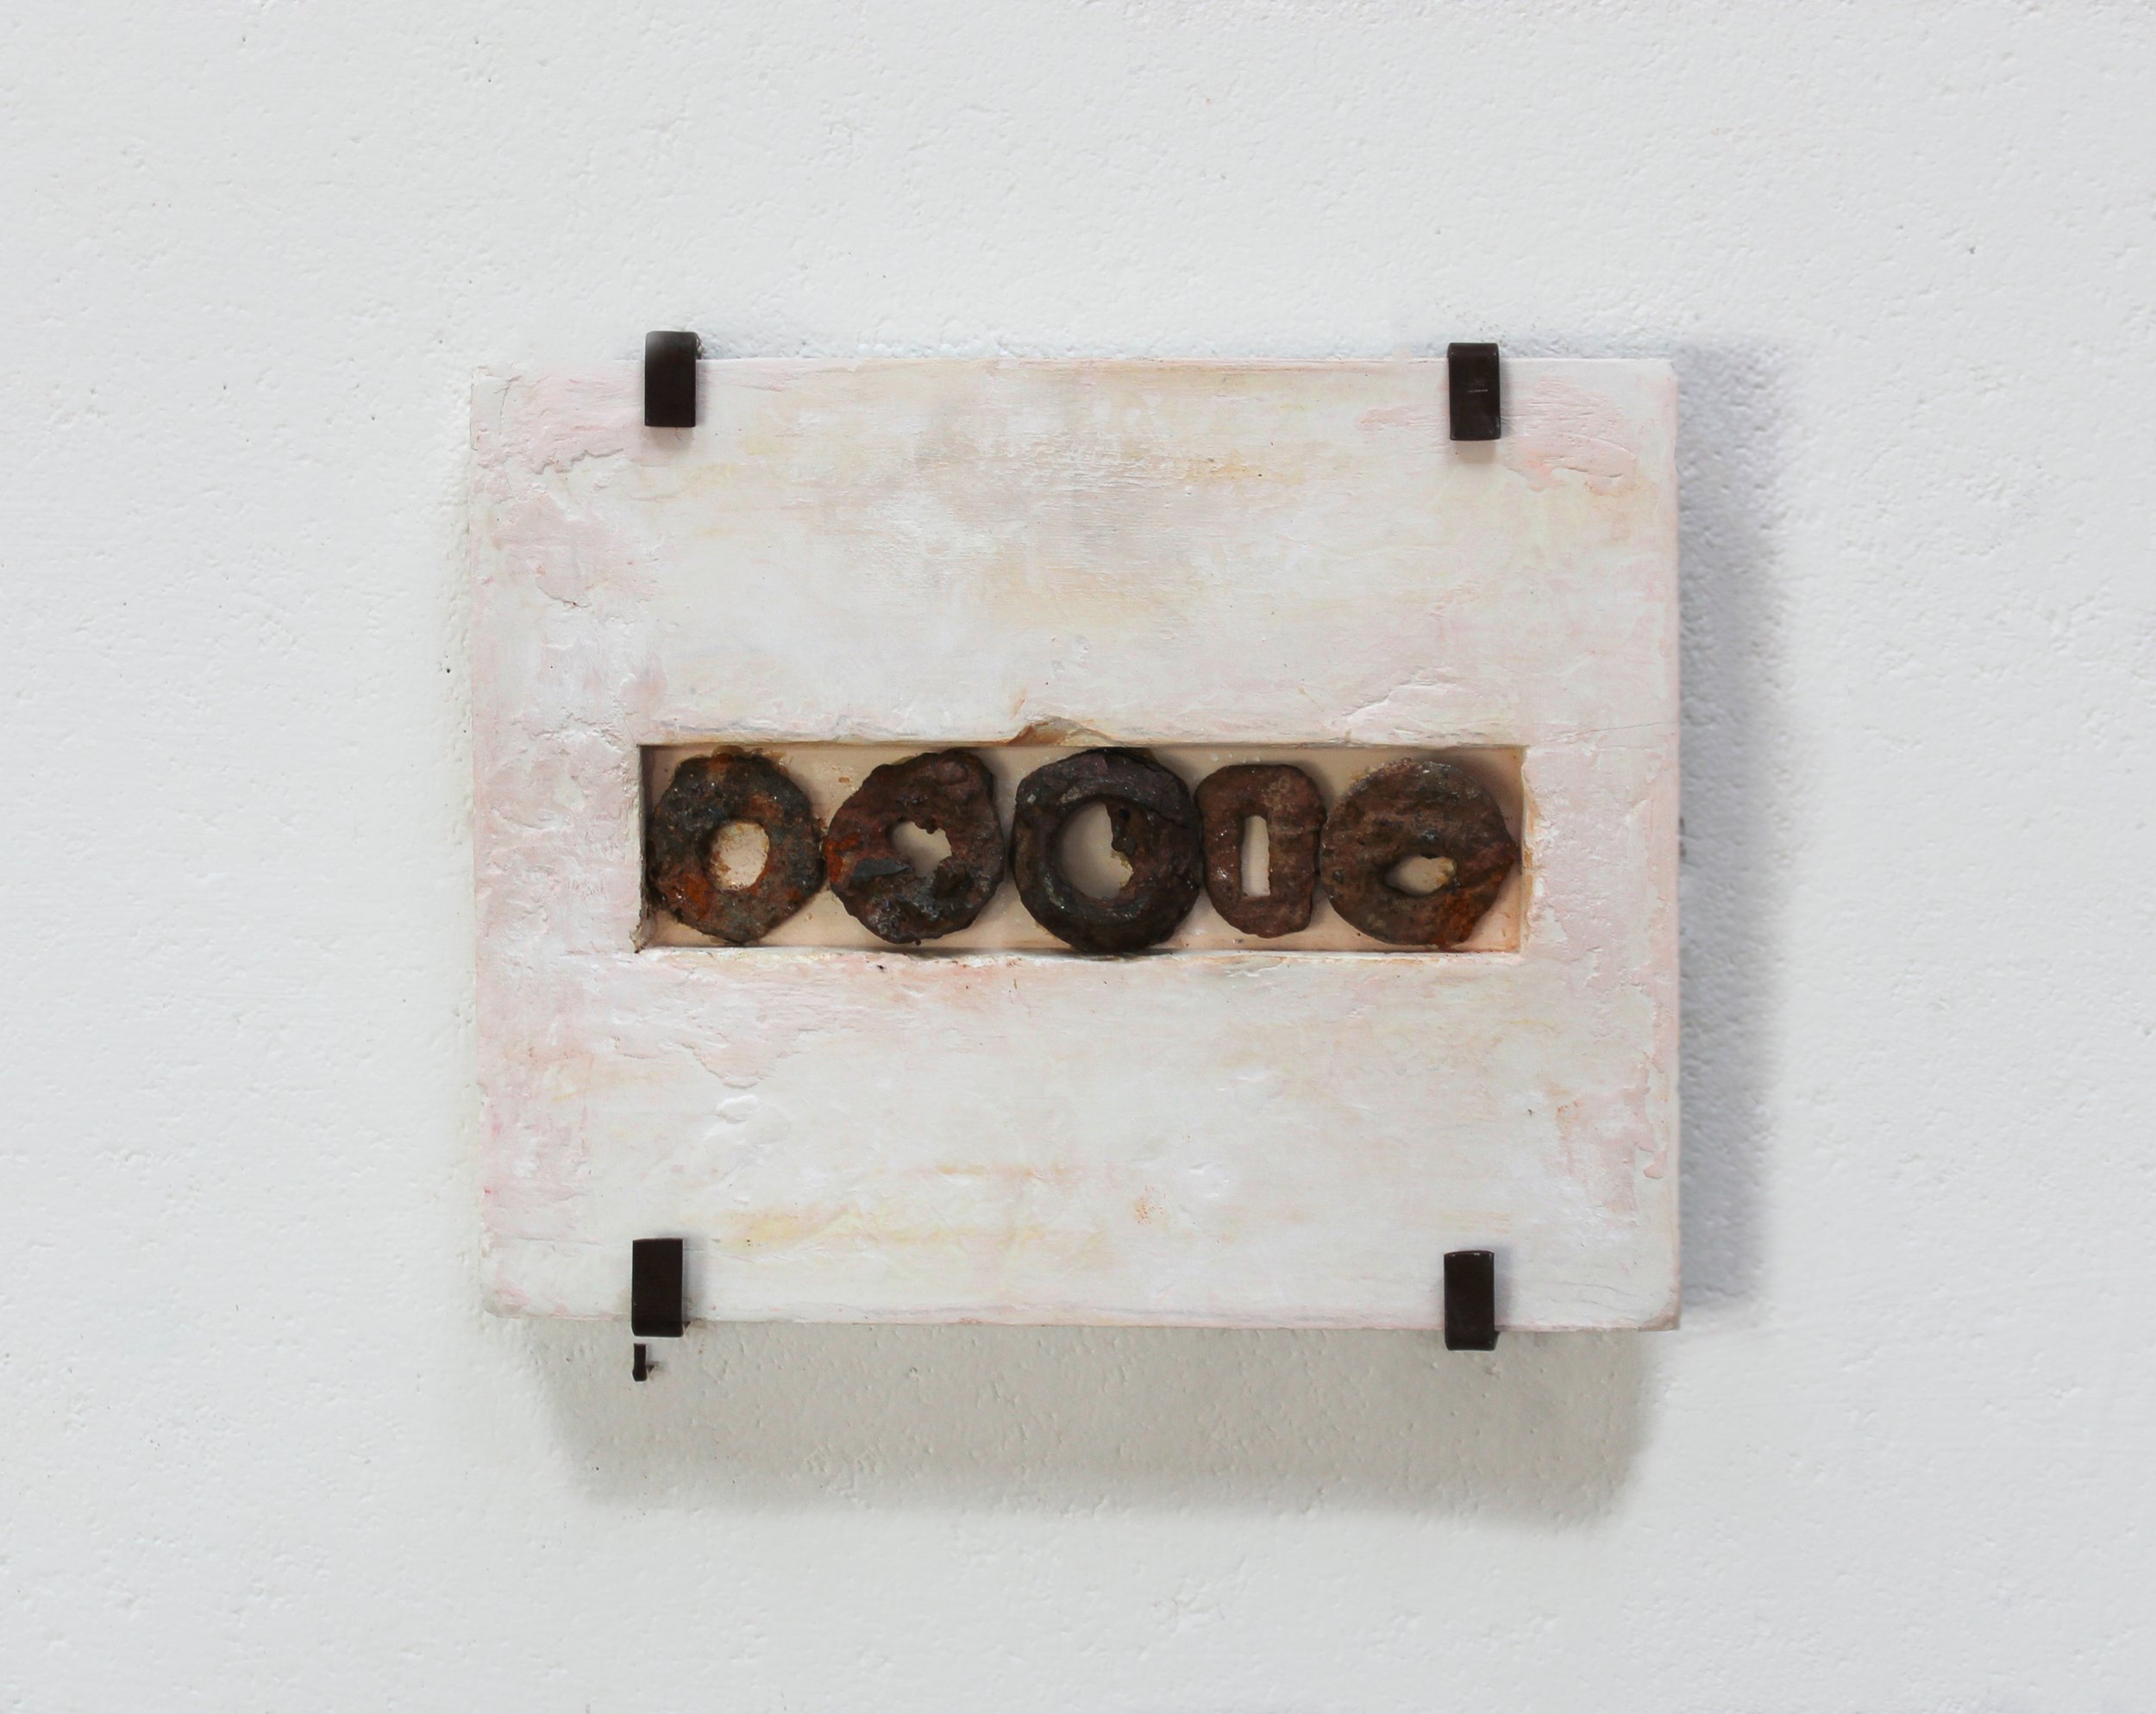 Georgie Mason 5_There amongst the rubble_rusty objects embedded in plaster with iron display mount_19 x 27cm_£700.jpg